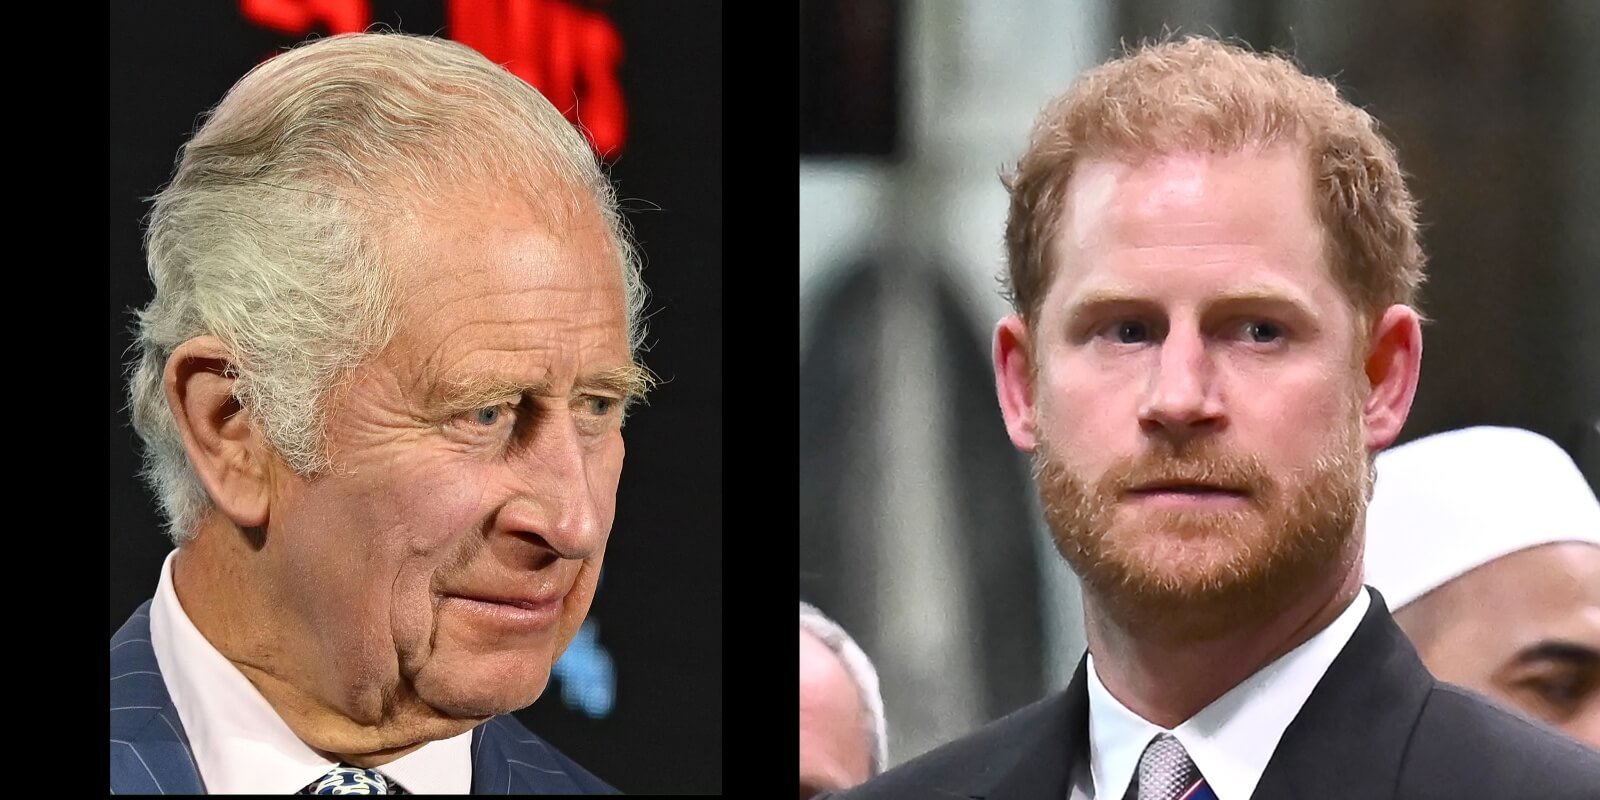 King Charles and Prince Harry in side-by-side photographs.